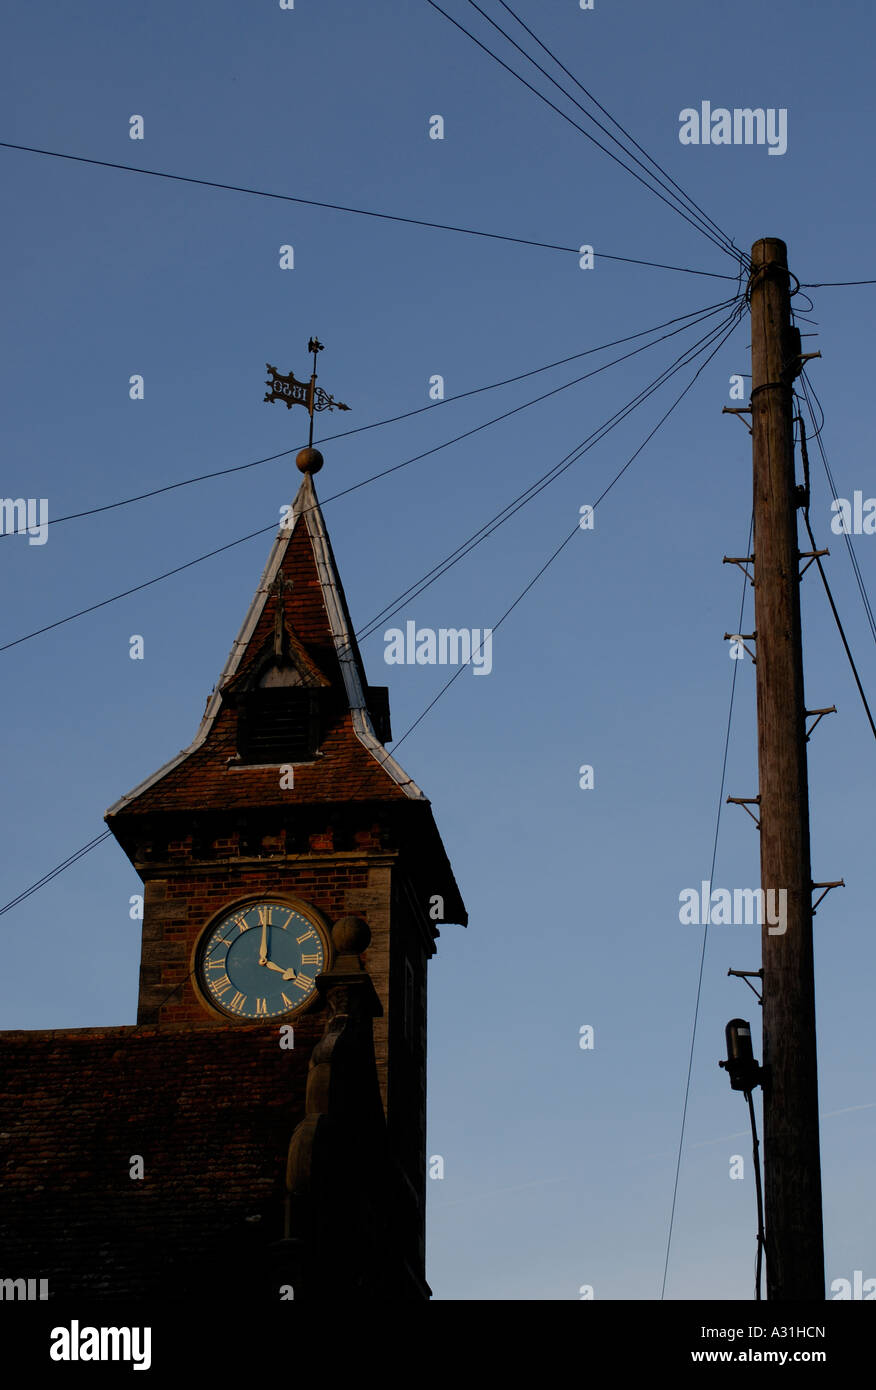 The clock tower of the old school and a telegraph pole The clock shows four o clock Stock Photo